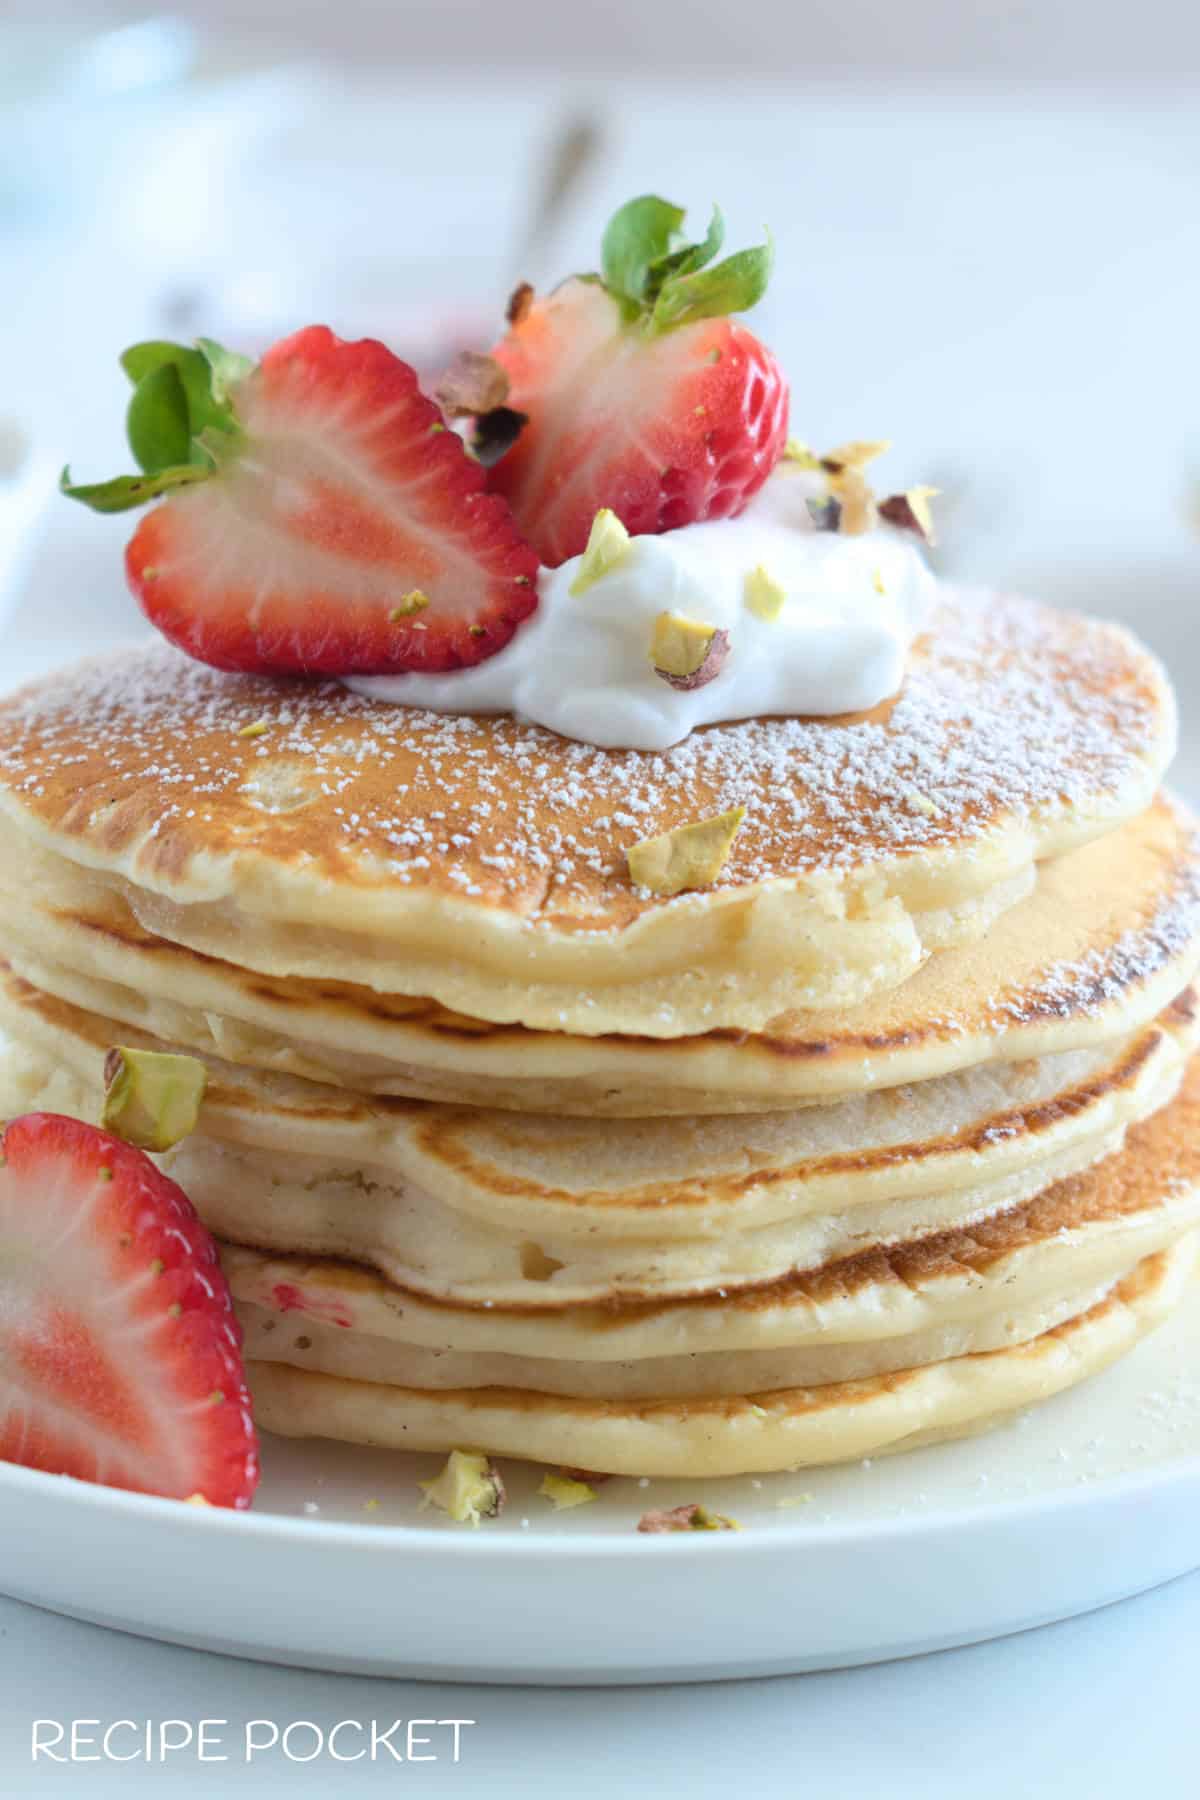 Pancakes with strawberries and cream on top.